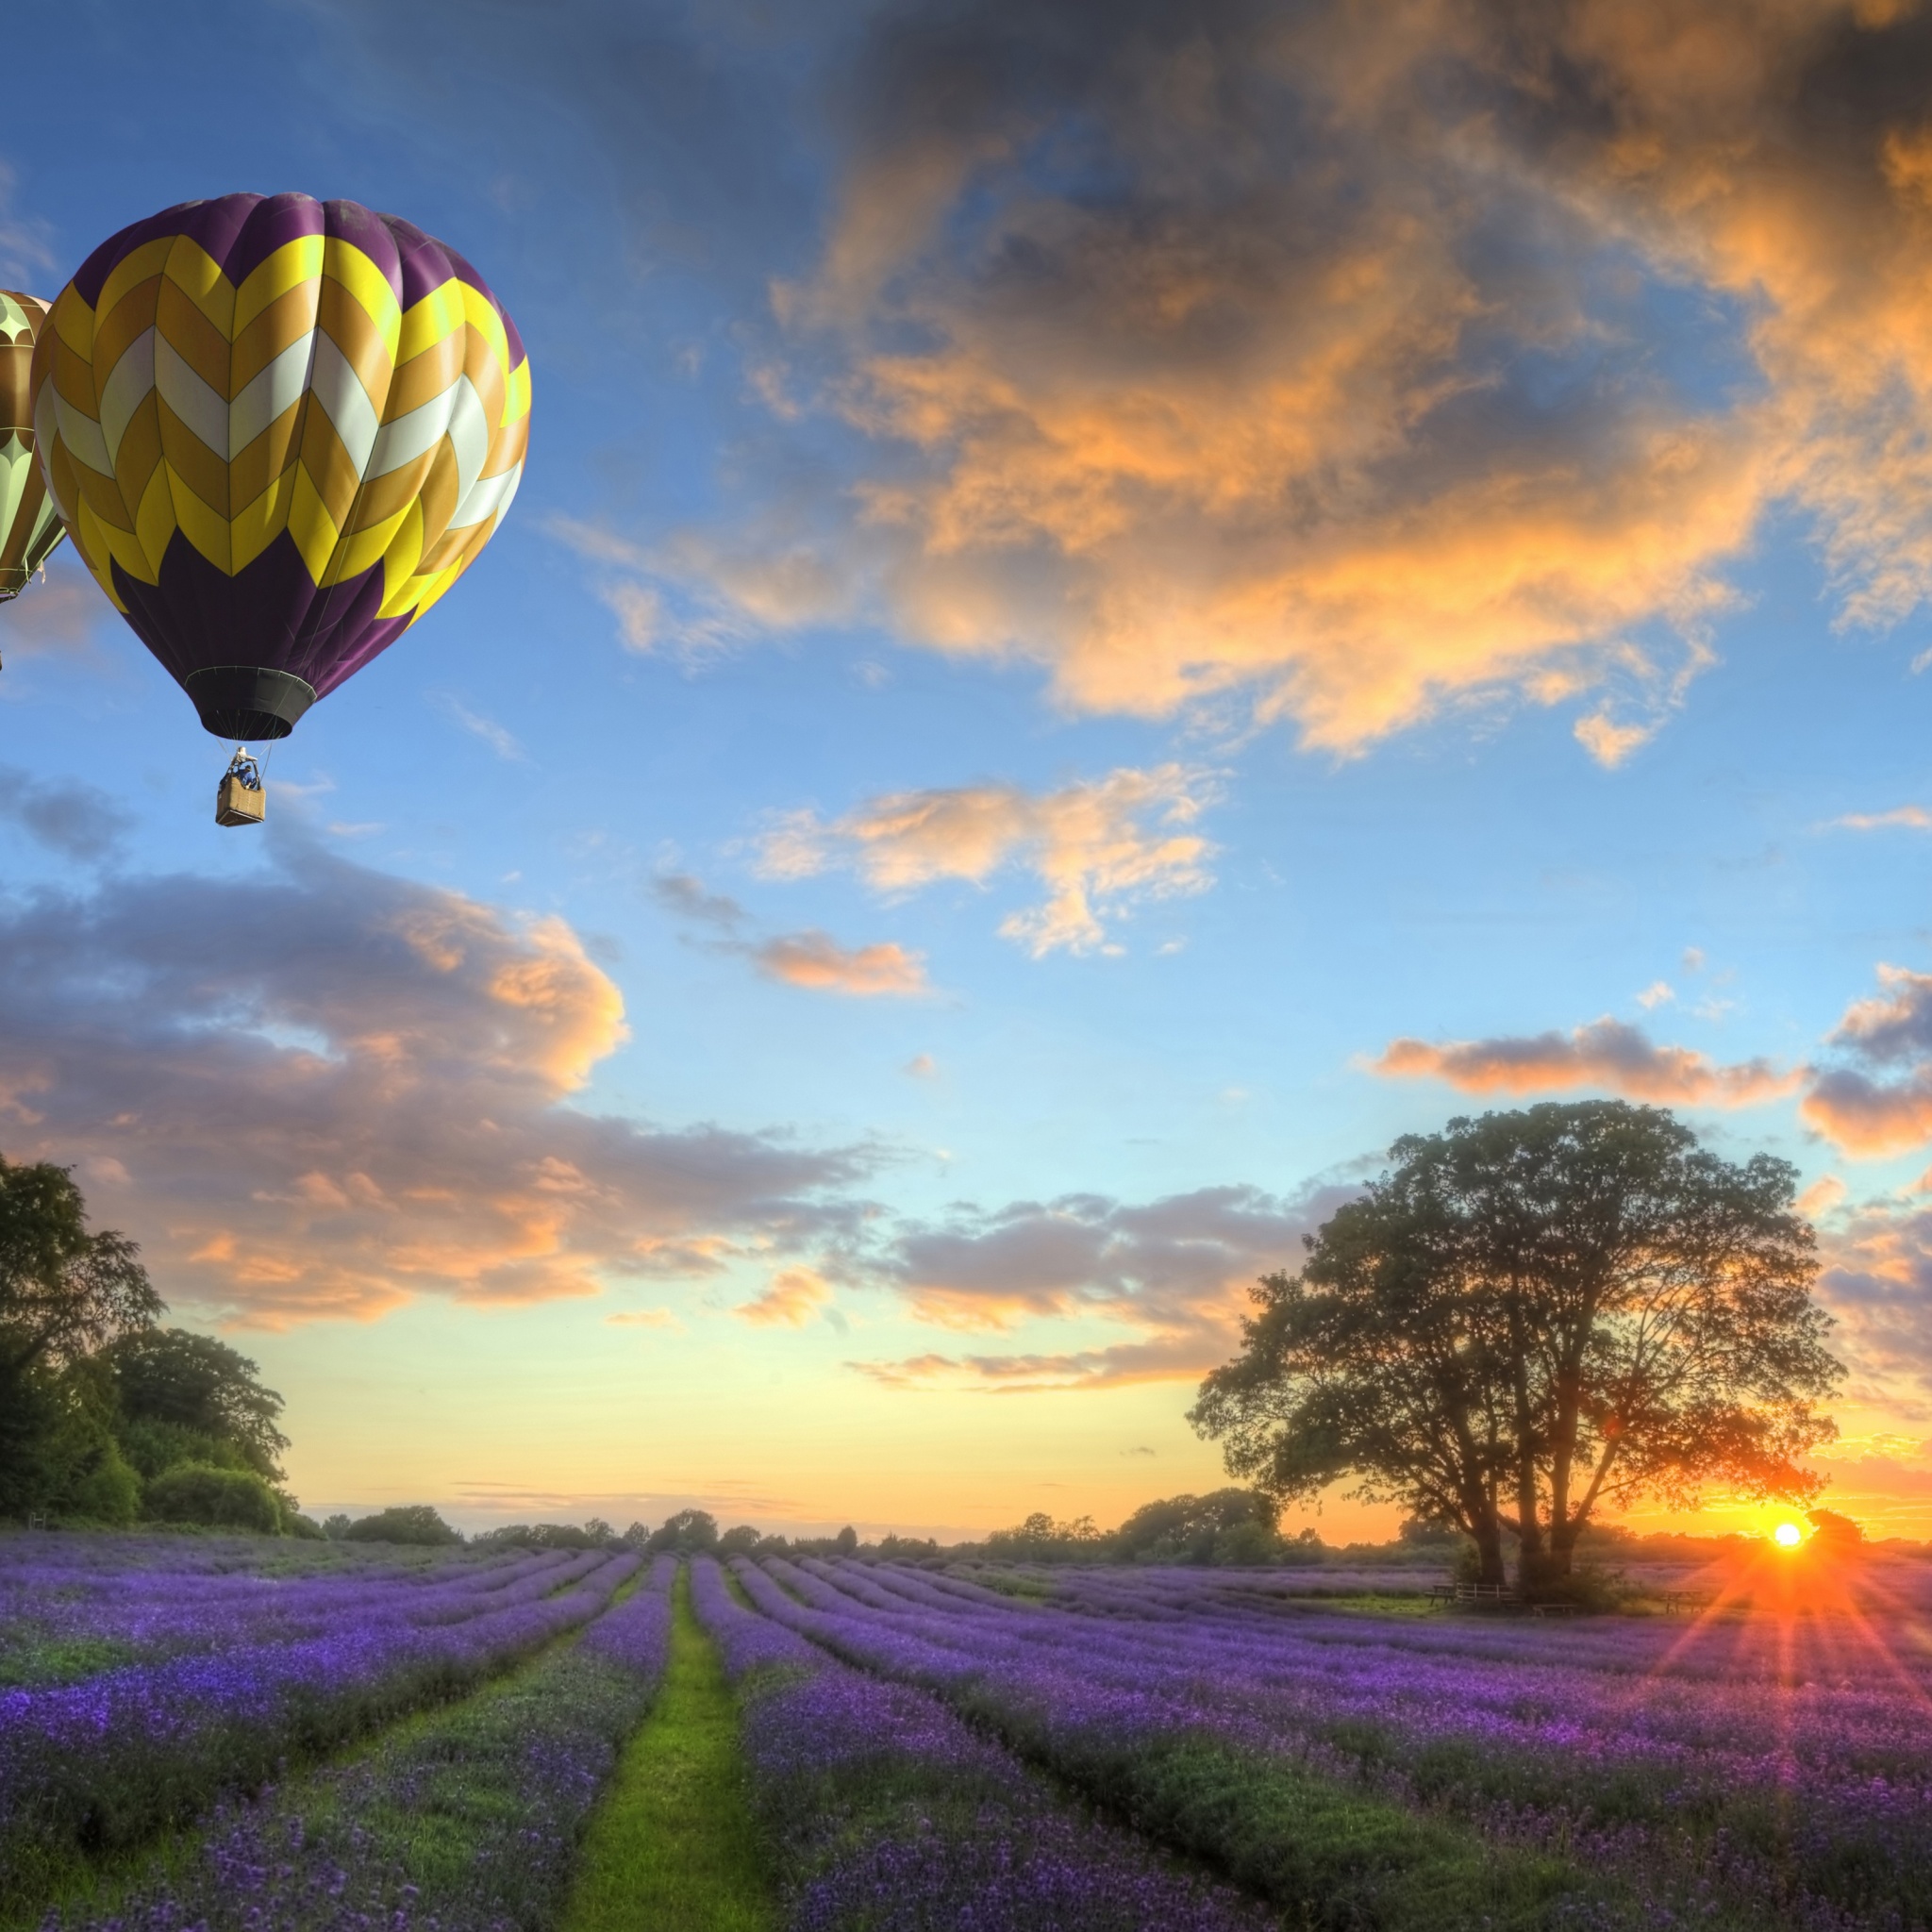 Hot Air Balloons Flying Over Land